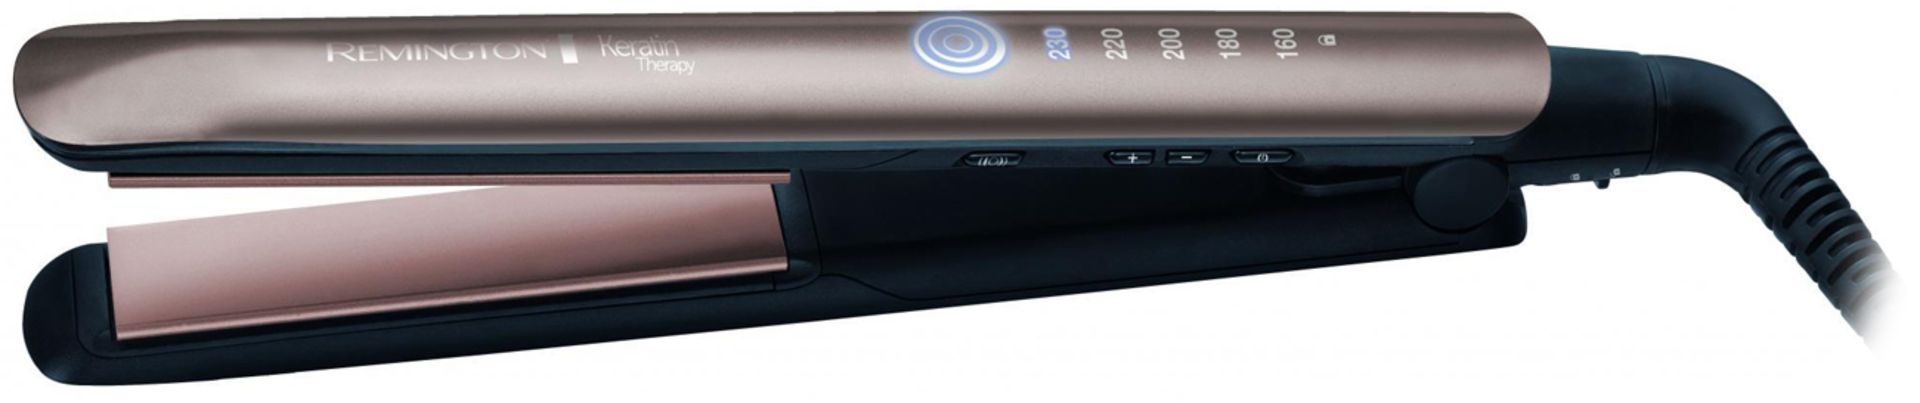 V Brand New Remington Keratin Therapy Pro Straighteners With 57% More Protection (As Seen On TV)